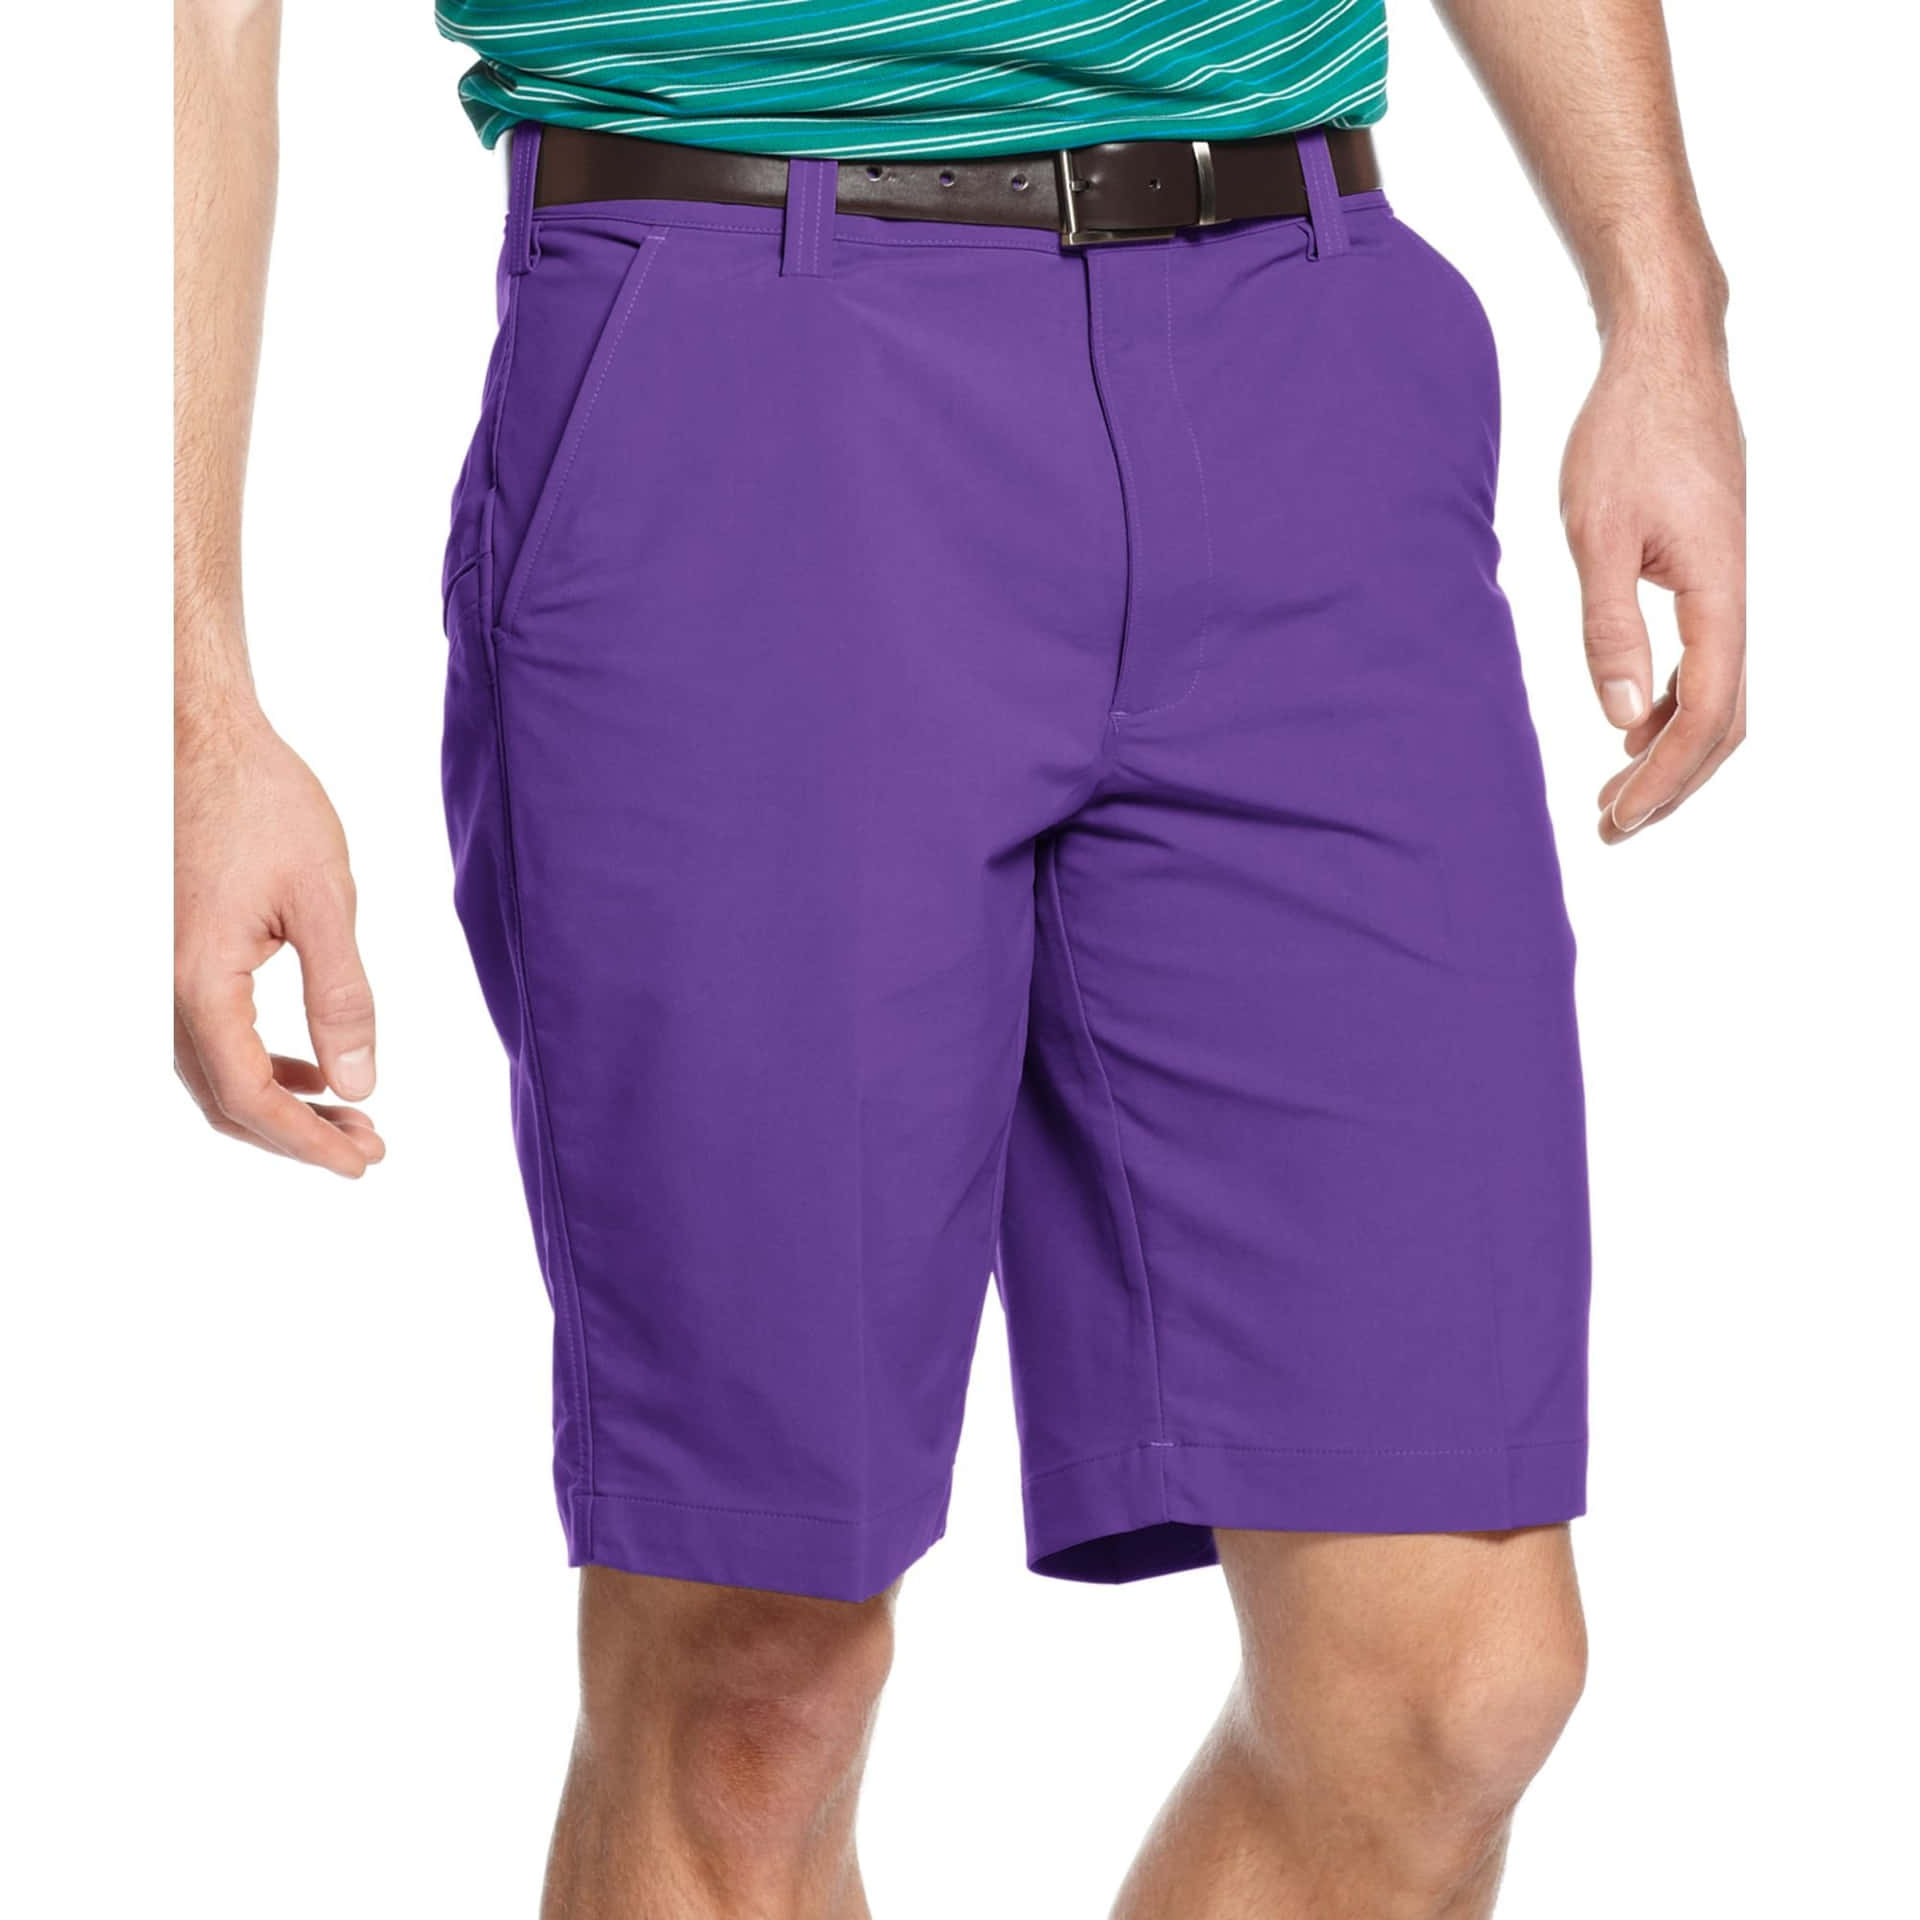 Show off your unique style in special purple shorts Wallpaper